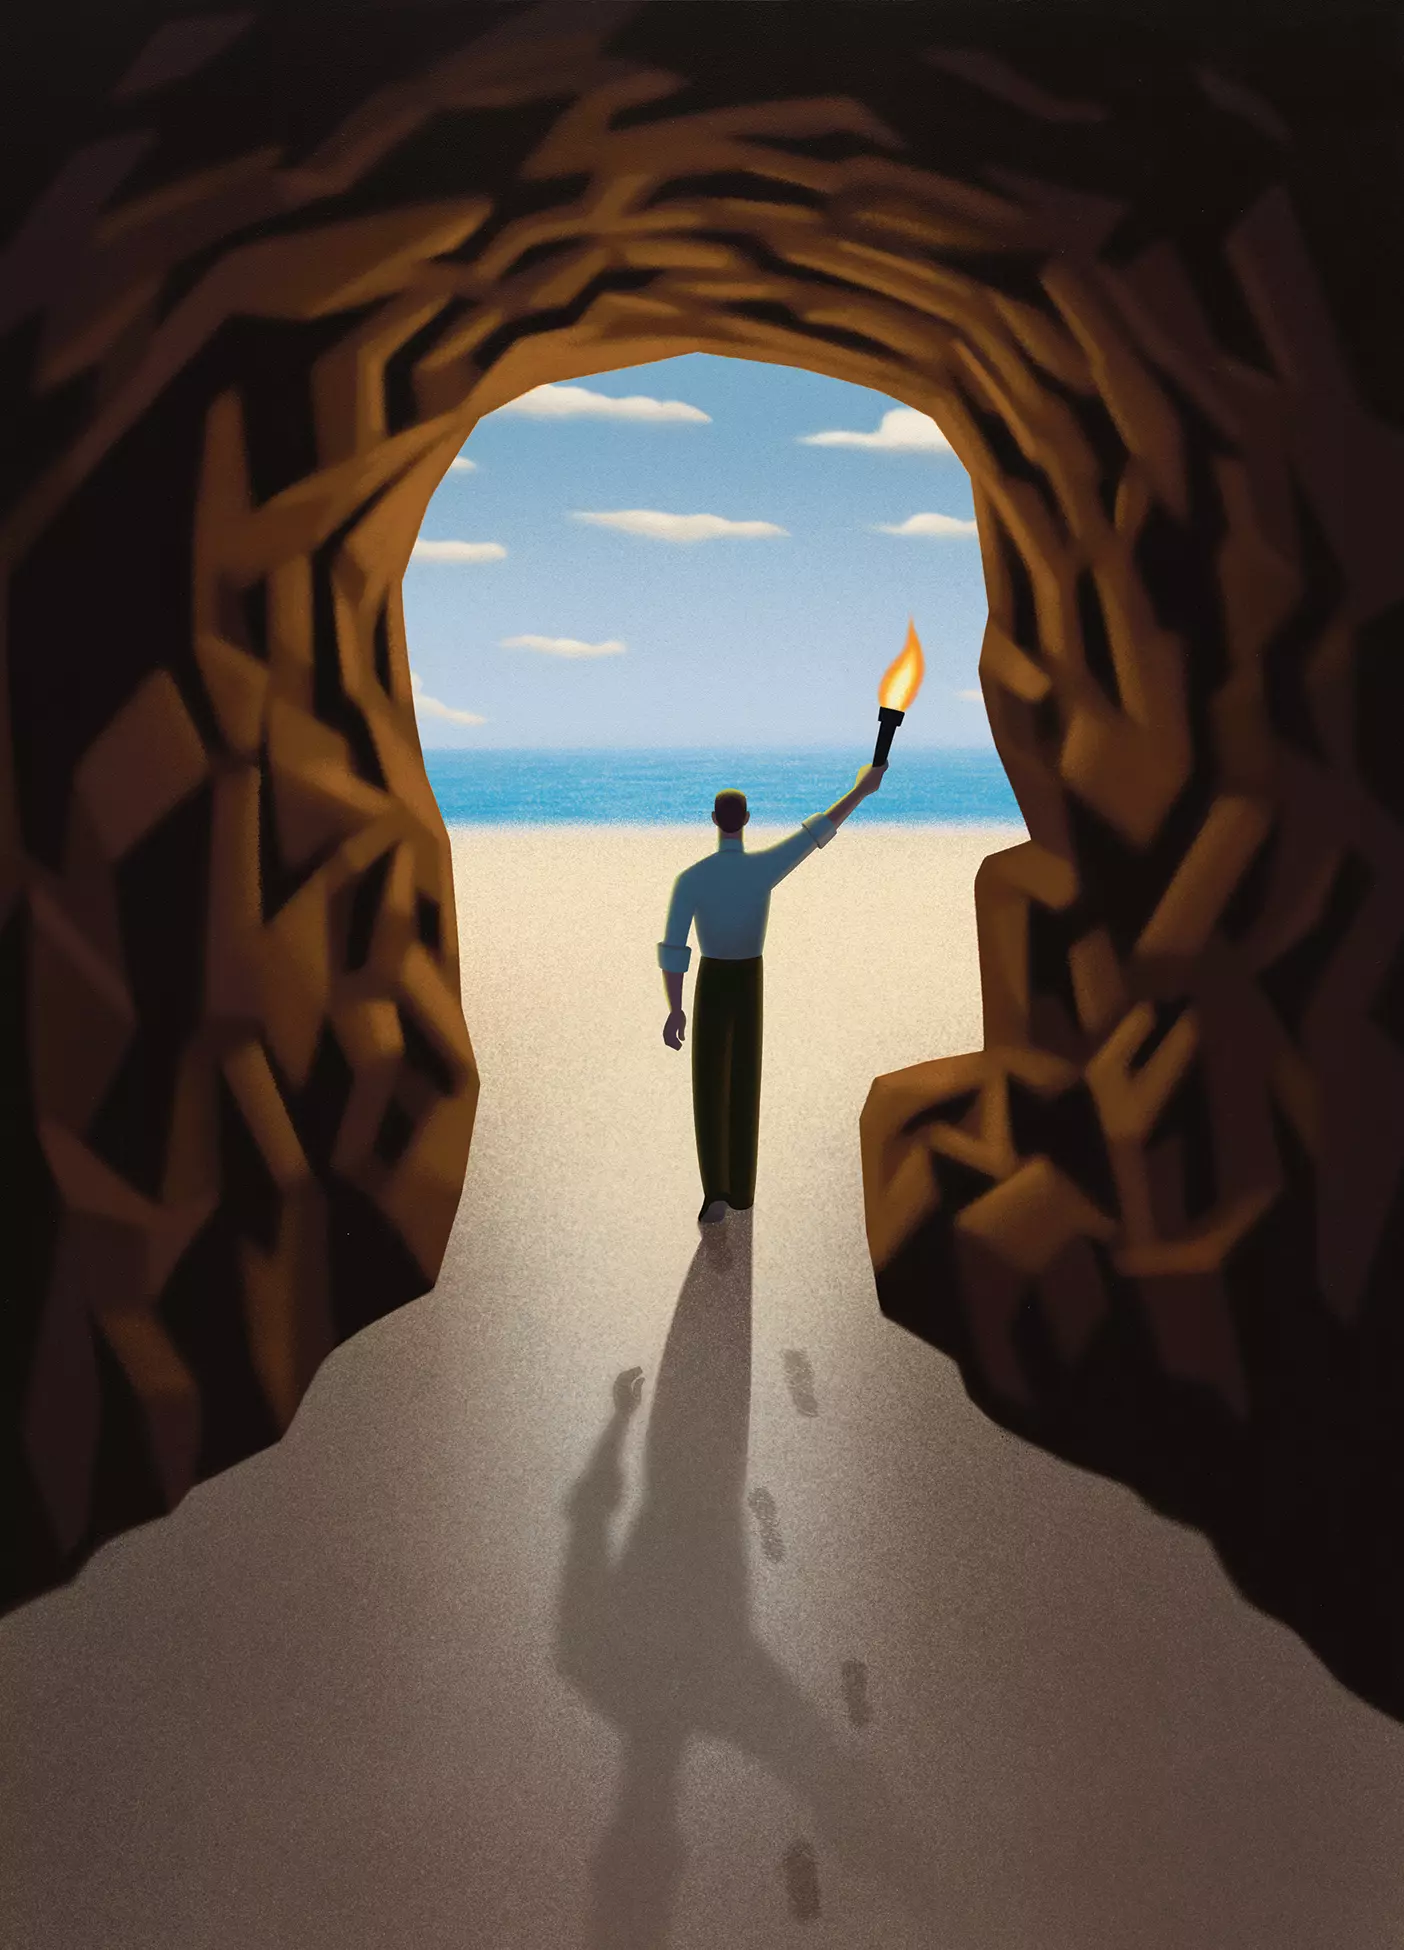 A man walks out of a dark cave onto a sunlight beach while carrying a torch.